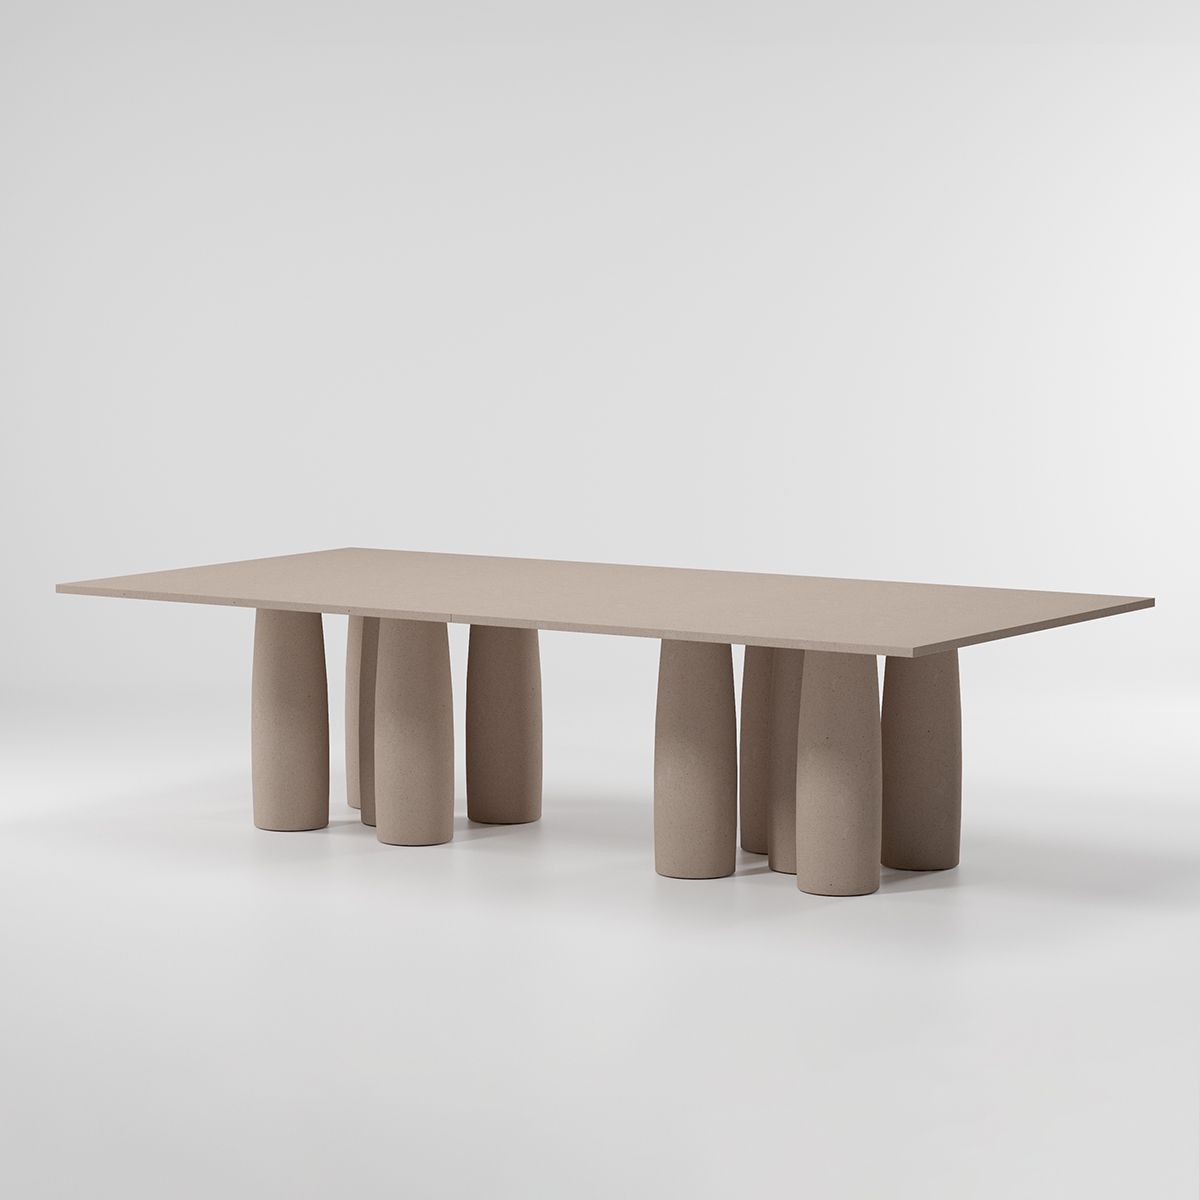 Minera stone dining table 280 x 140 / 12 Guest